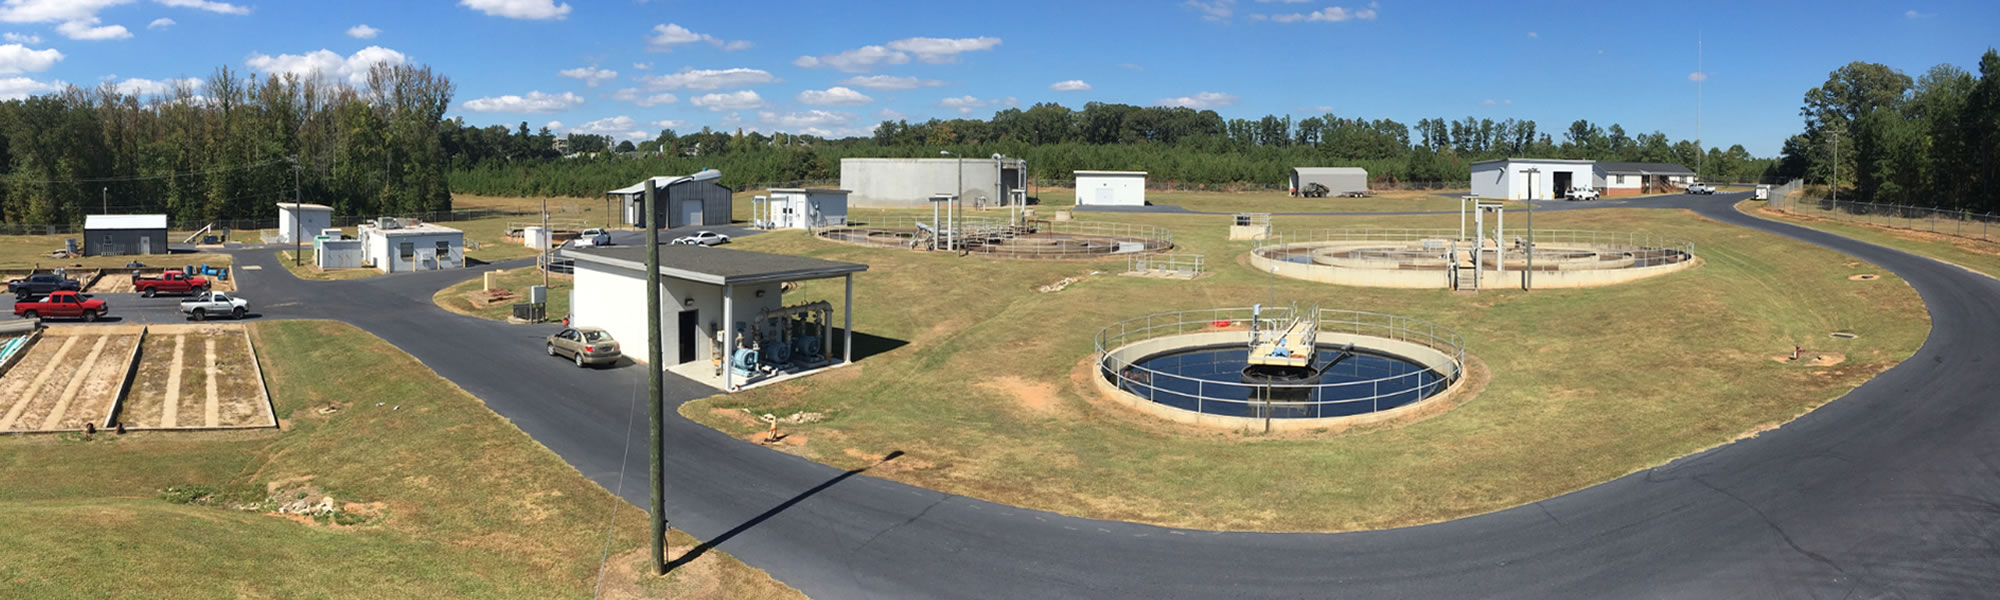 City of Inman Wastewater Treatment Plant